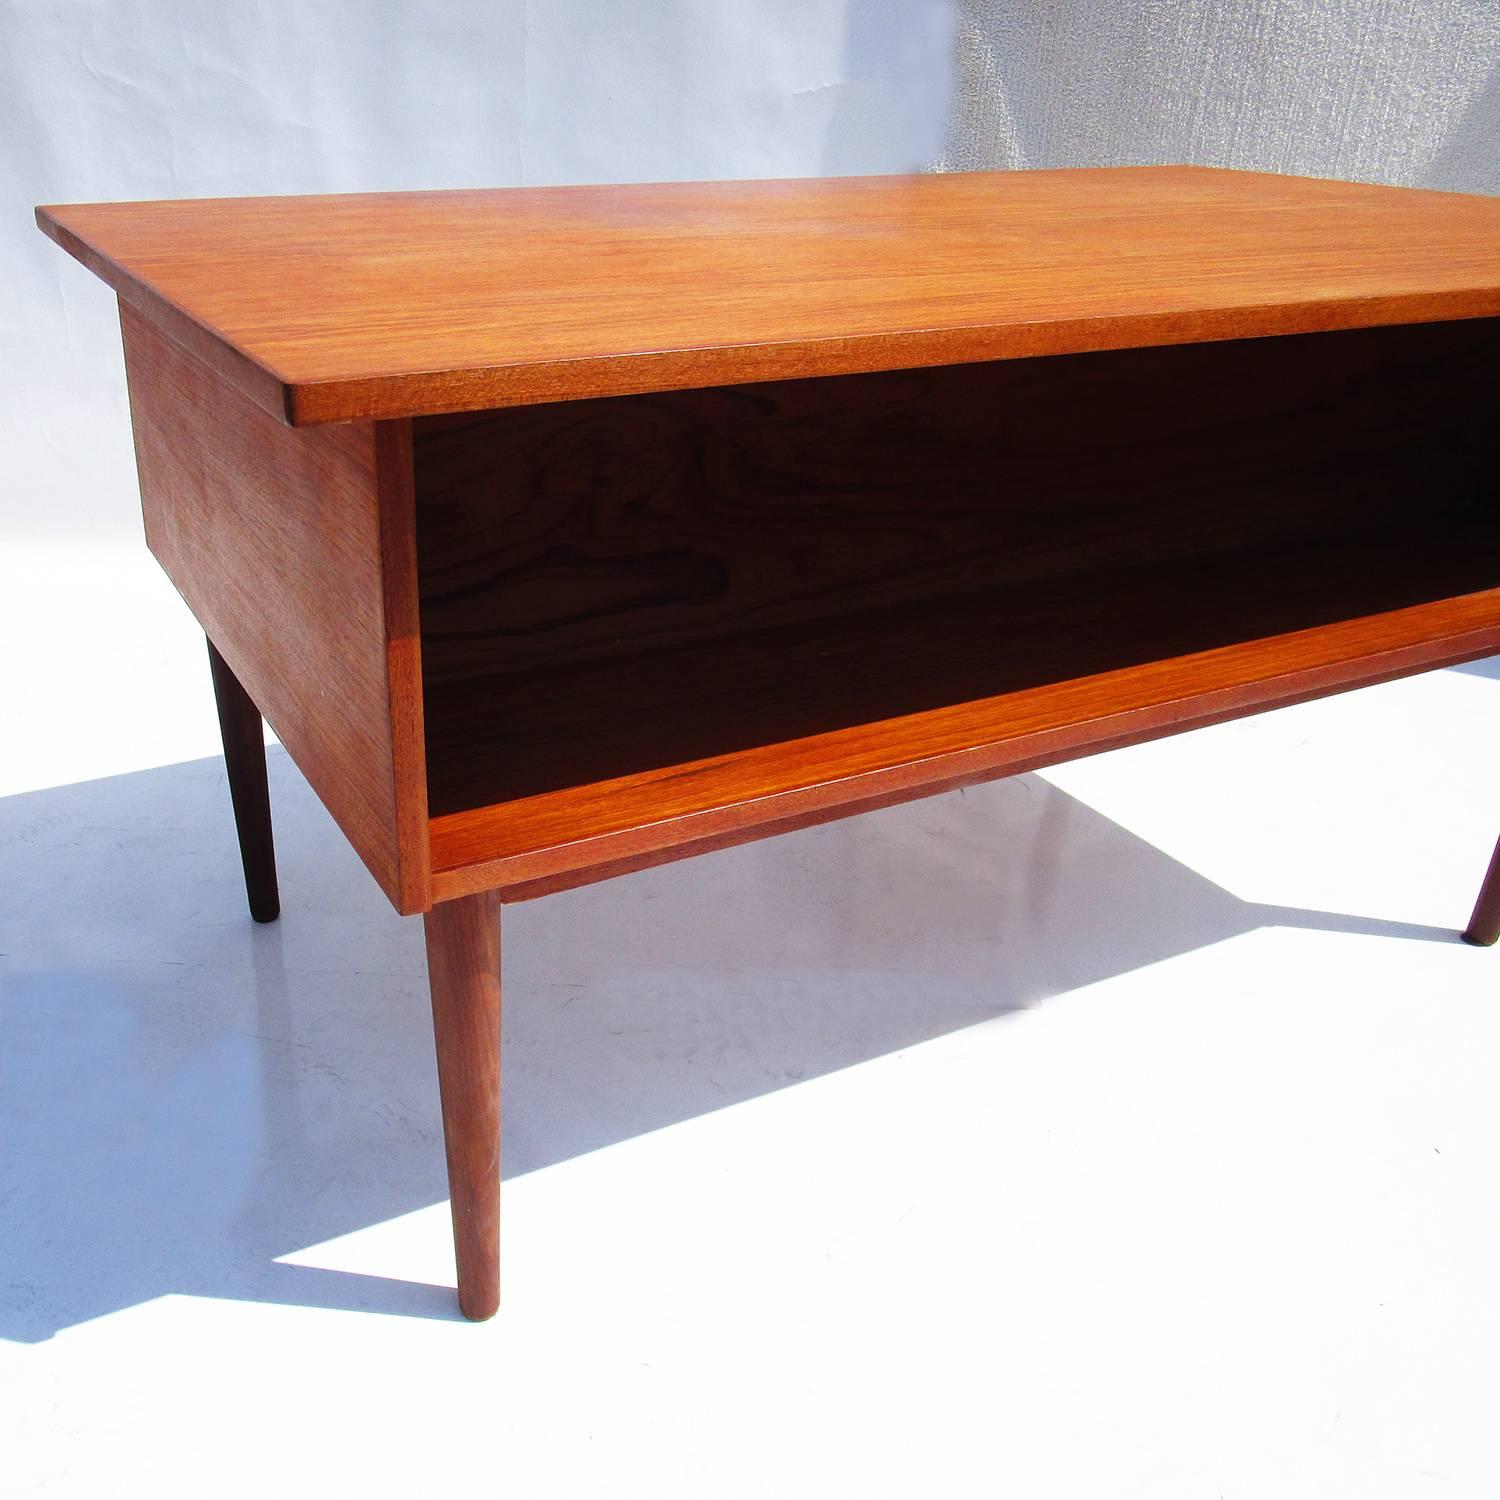 Lacquered Danish Mid-Century Modern Teak Desk with Bookcase Front For Sale